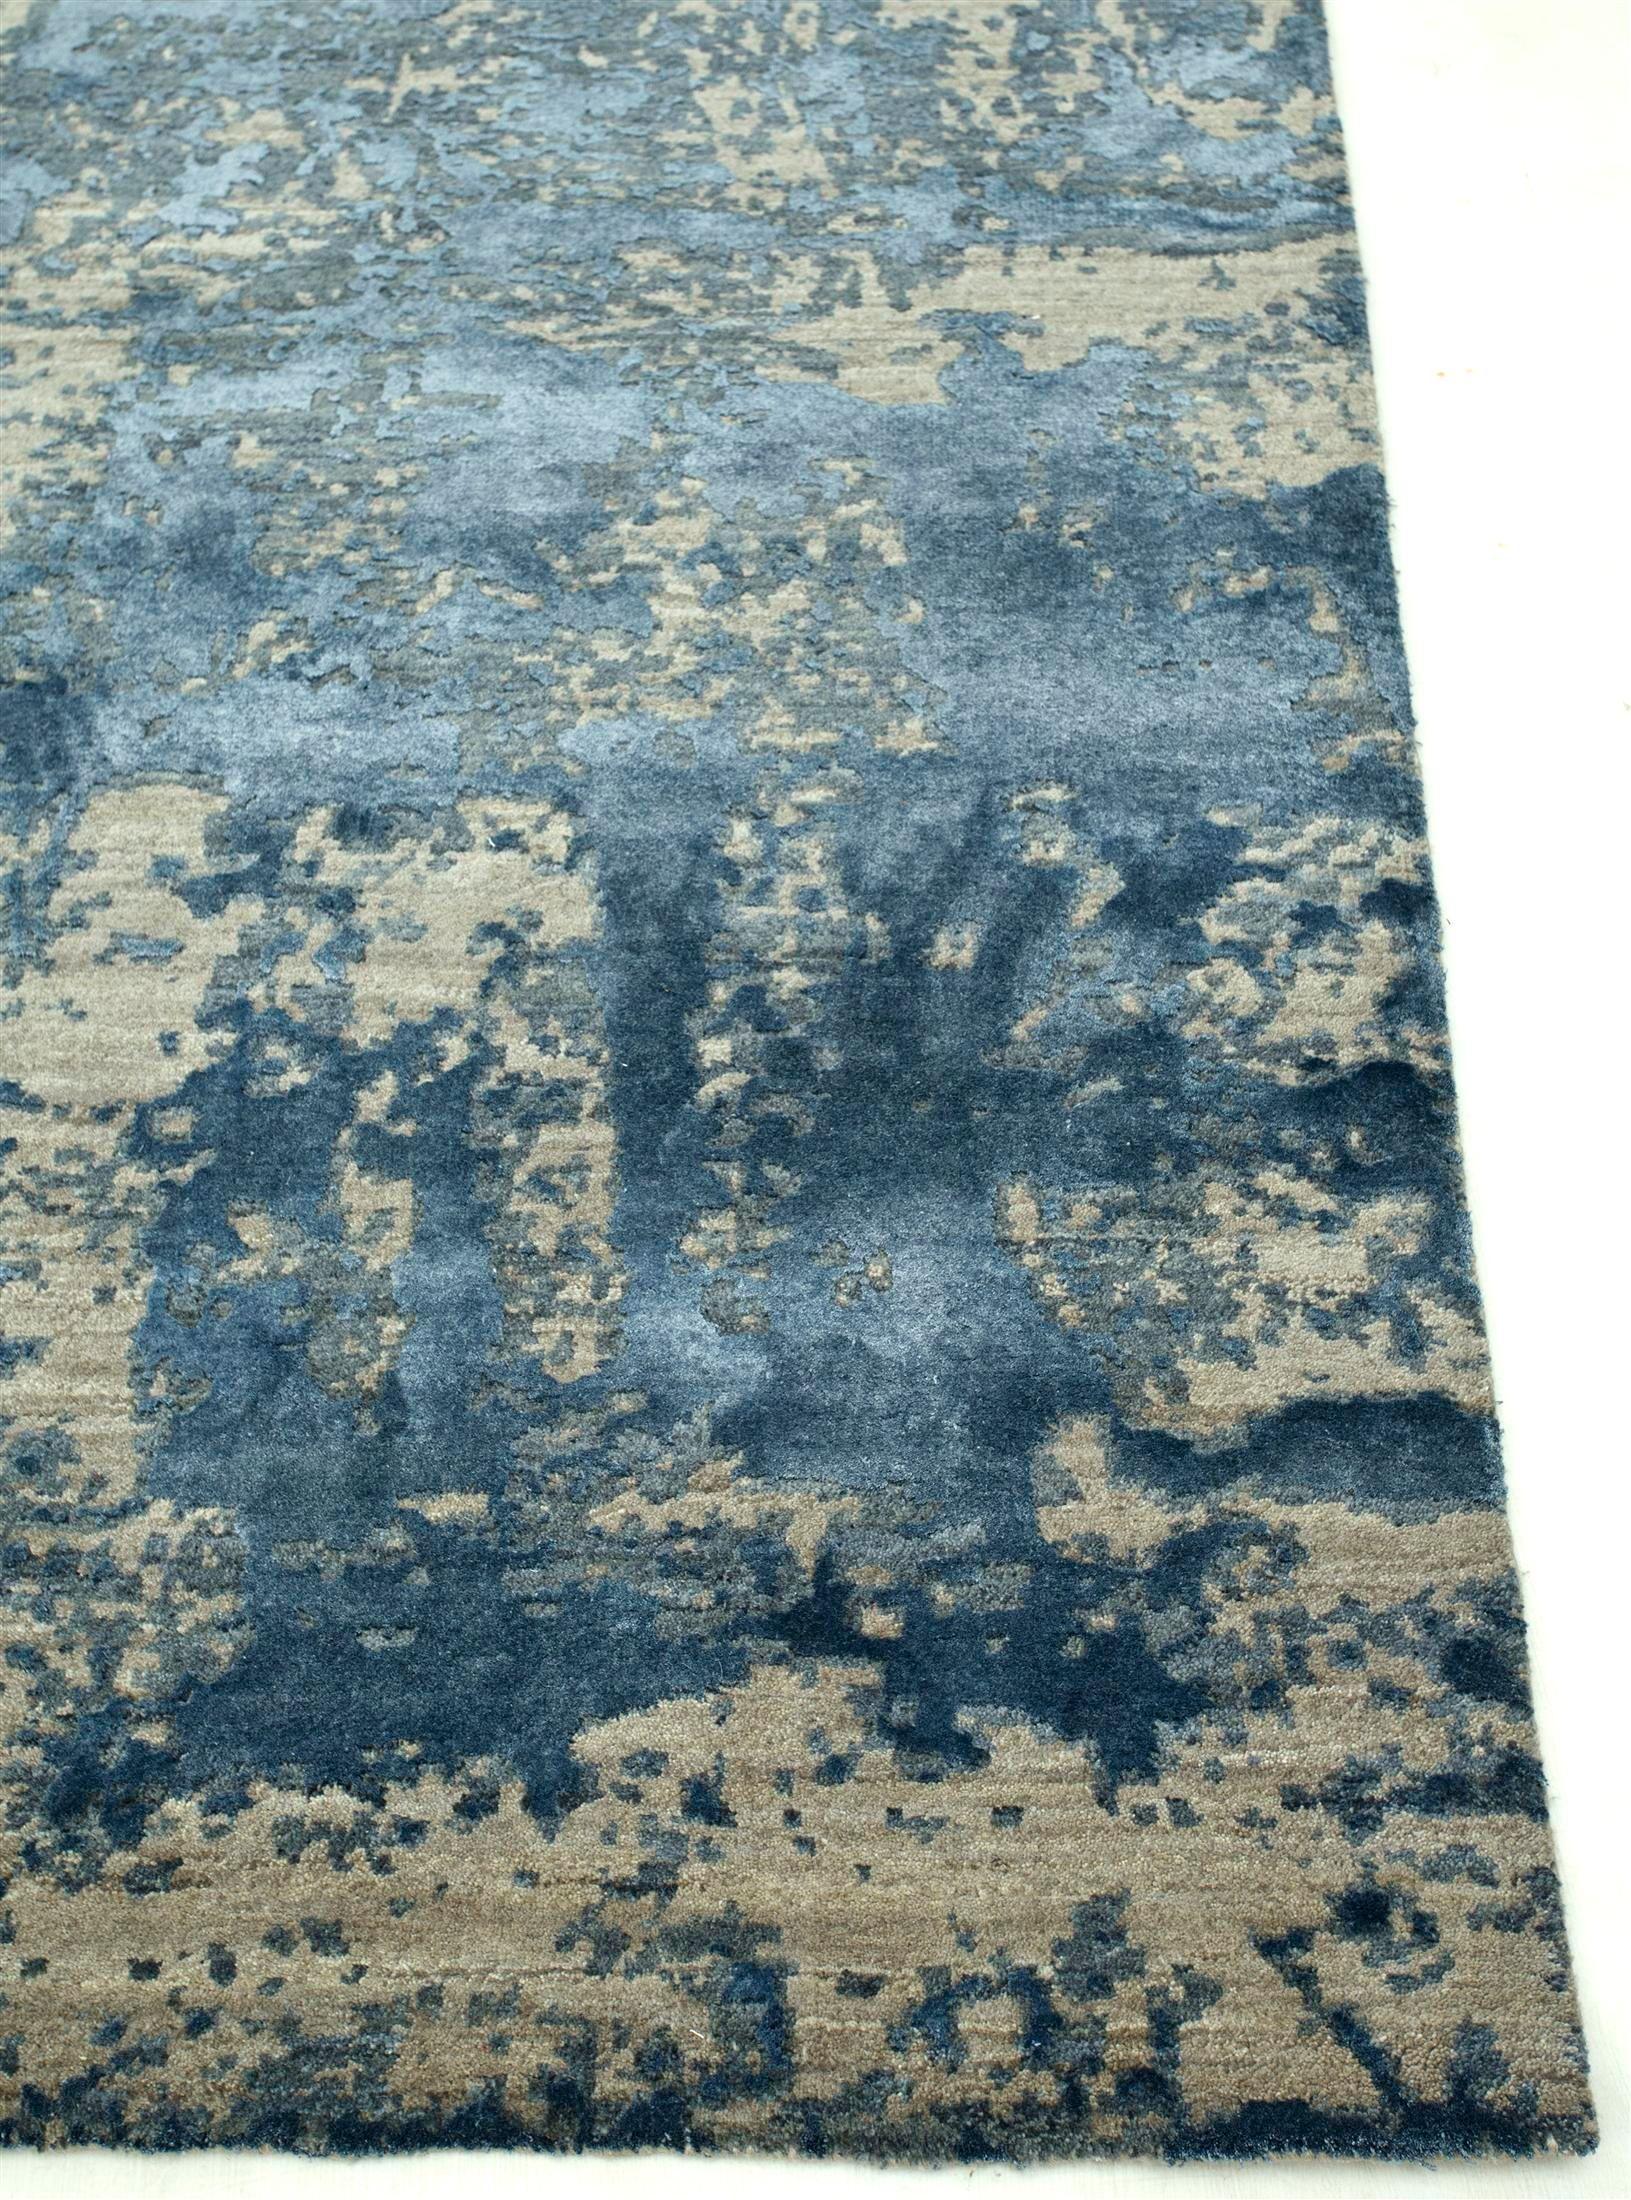 Introducing the Hand Knotted Rug, a contemporary masterpiece that artfully embraces the allure of imperfection. This unique creation is a visual exploration of misprints and nature's intervention in mechanical duplication, resulting in a captivating